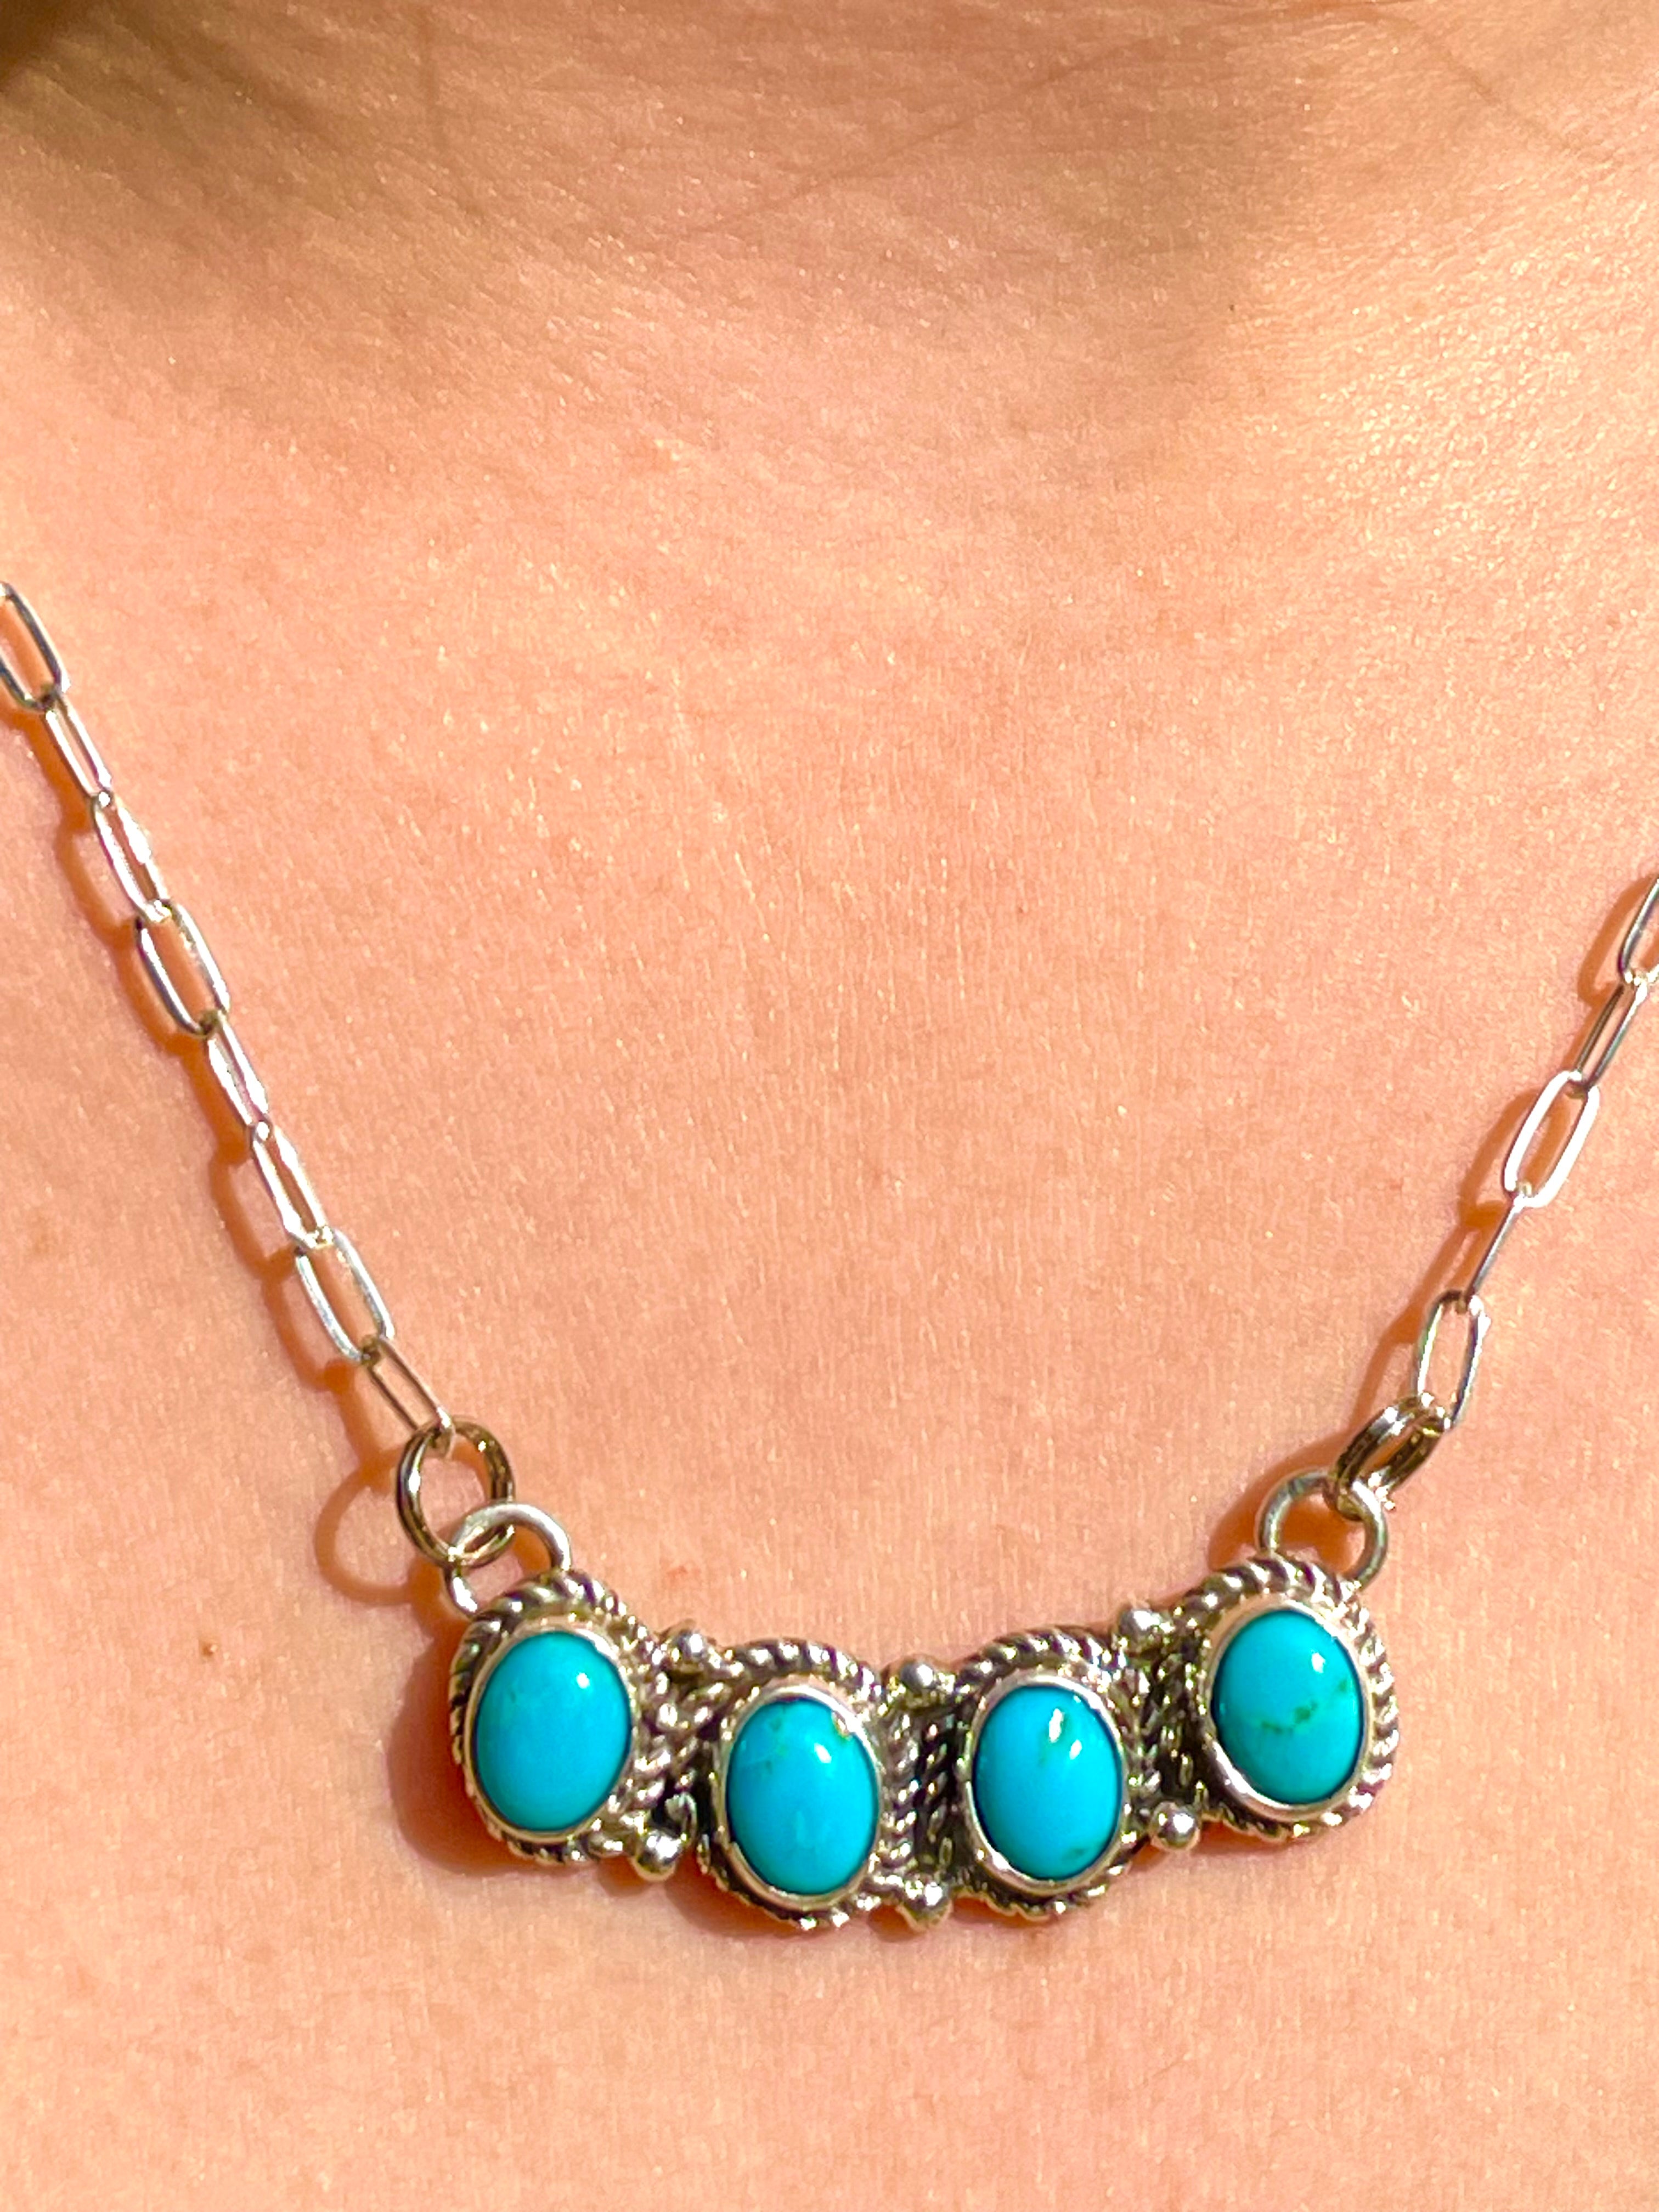 Navajo turquoise necklace